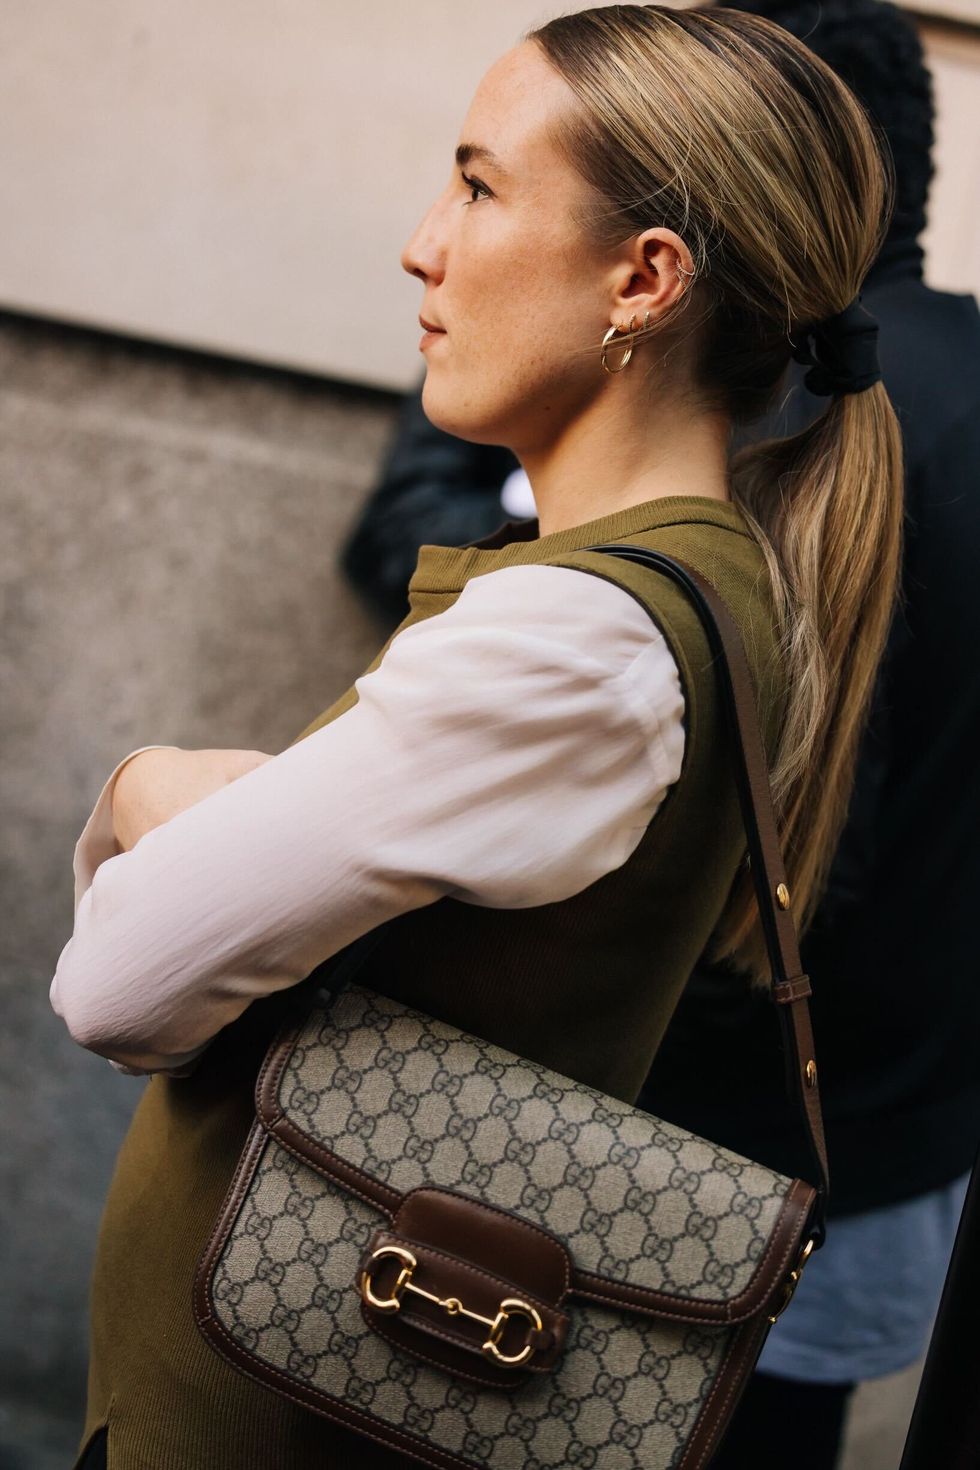 The Best Investment Bags To Buy 2023 - Classic Designer Bags